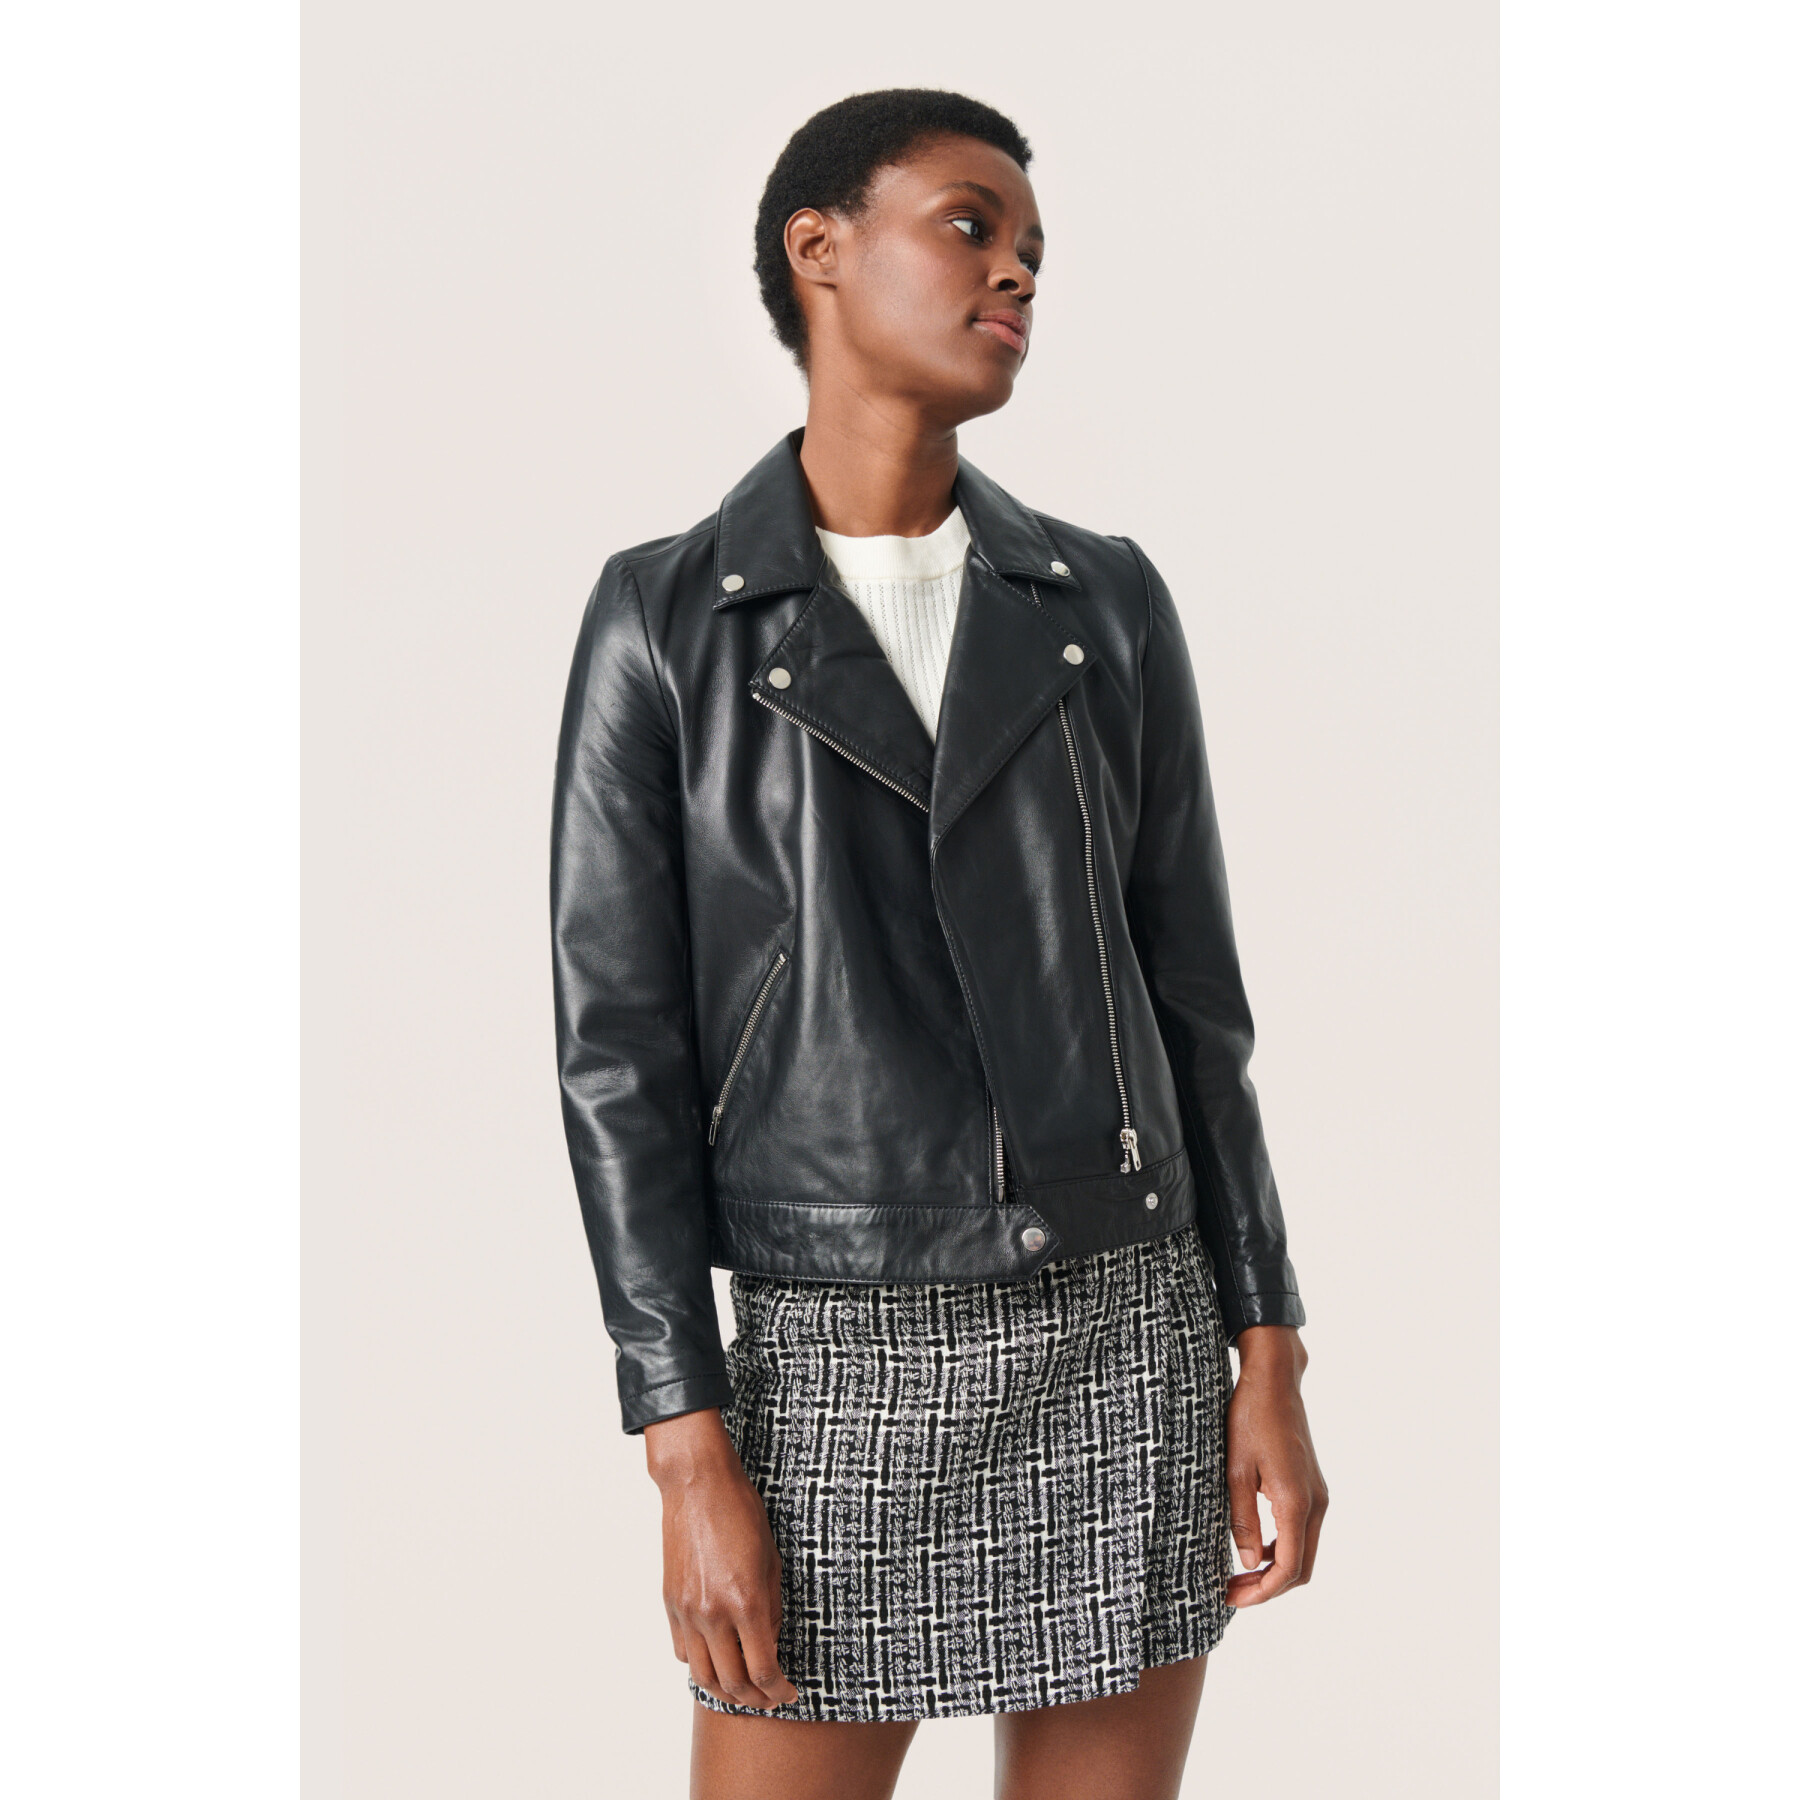 Women's long-sleeved leather jacket Soaked in Luxury Maeve